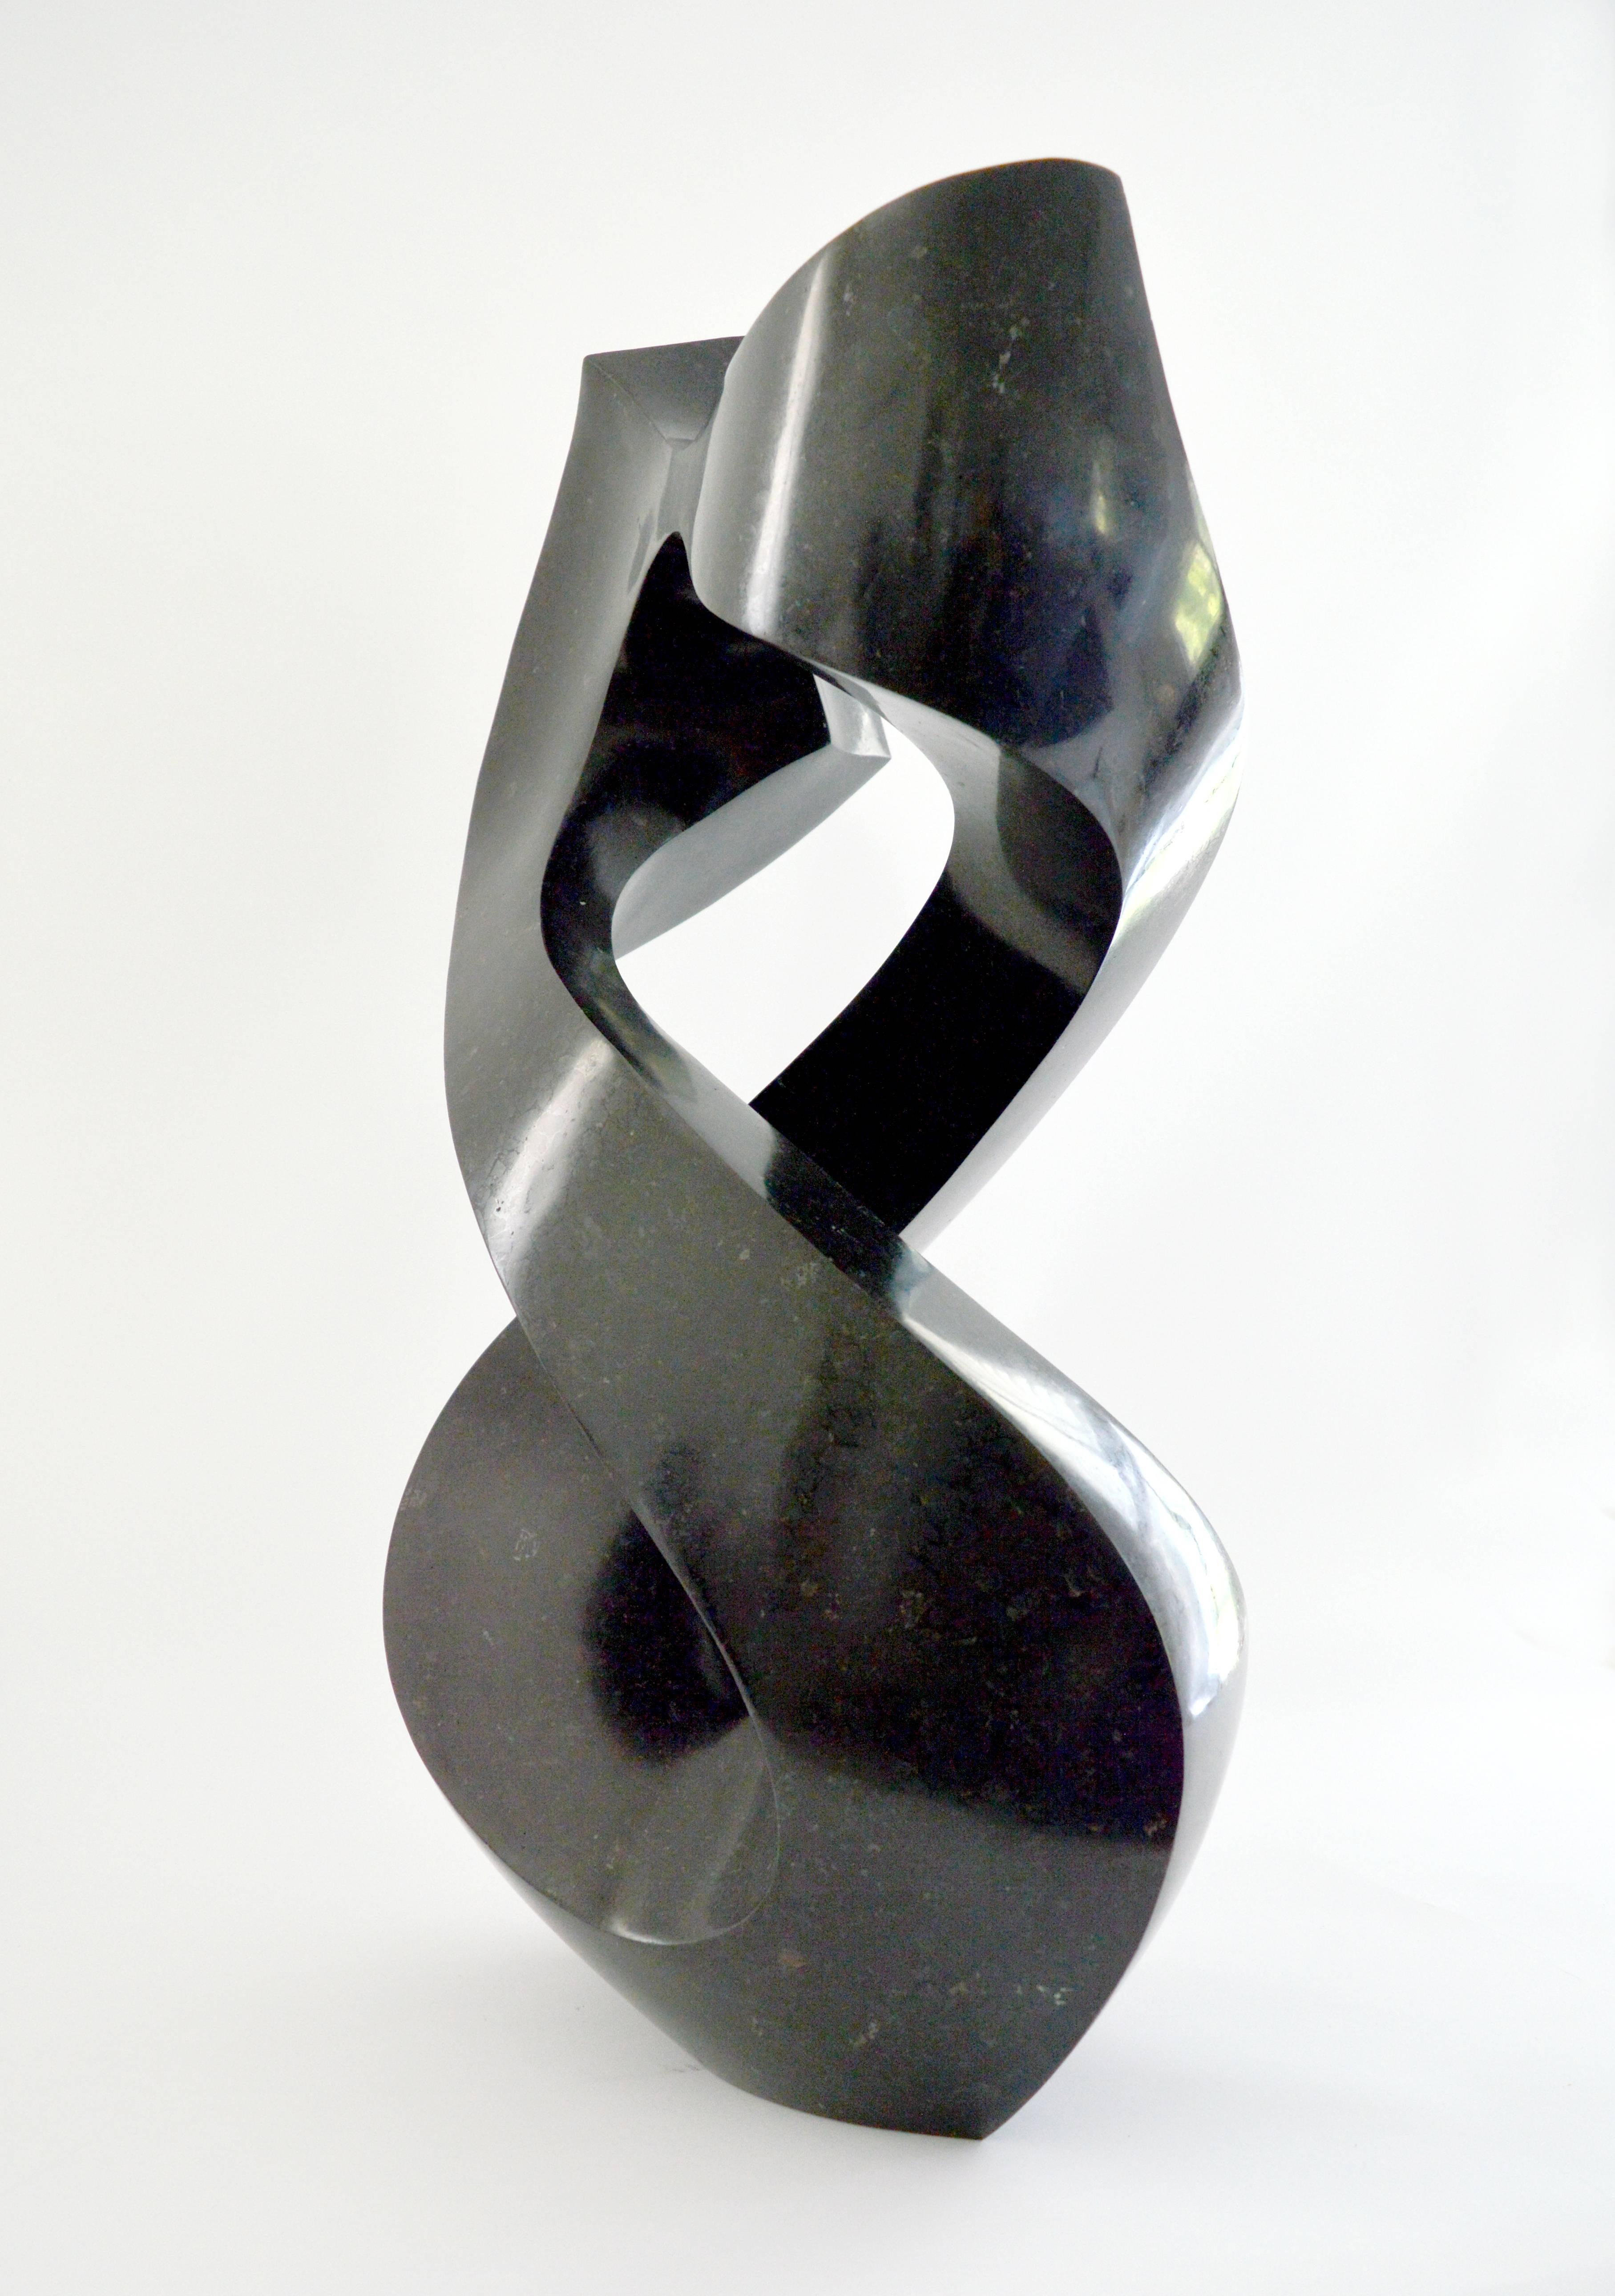 Halcyon Black - Abstract Sculpture by Jeremy Guy